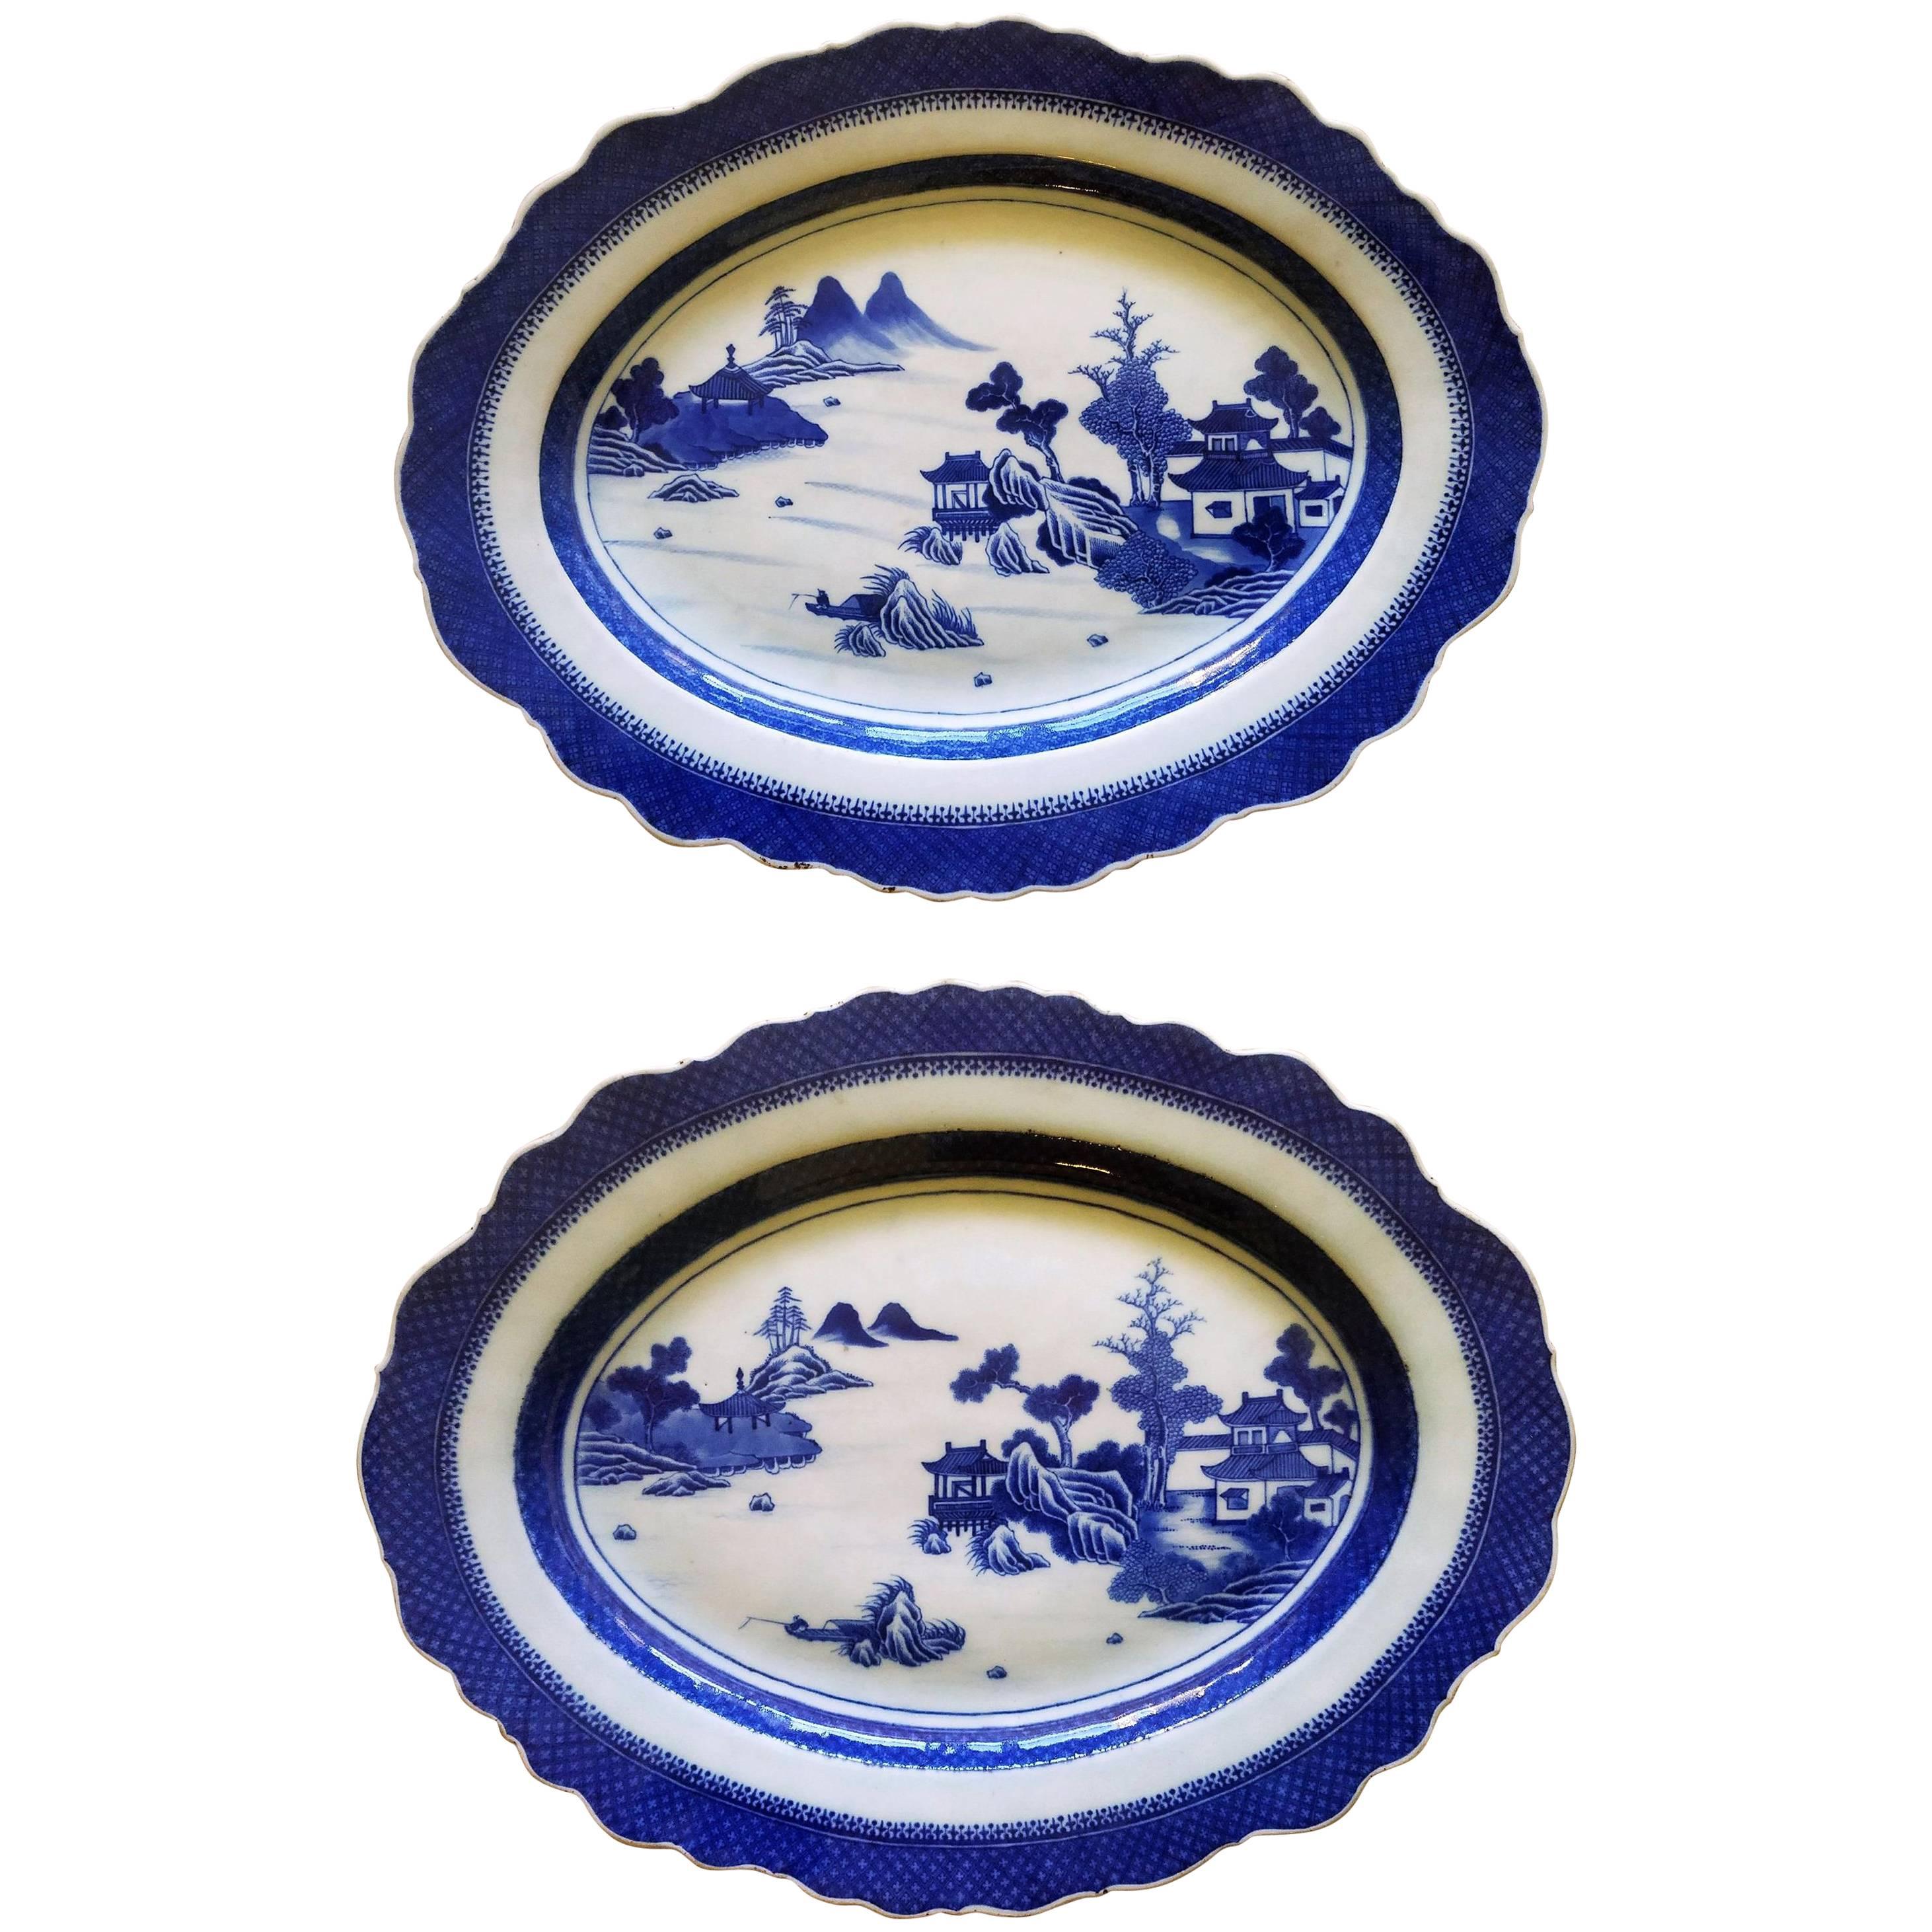 Chinese Export Blue and White Porcelain Large Silver-Form Shaped Dishes